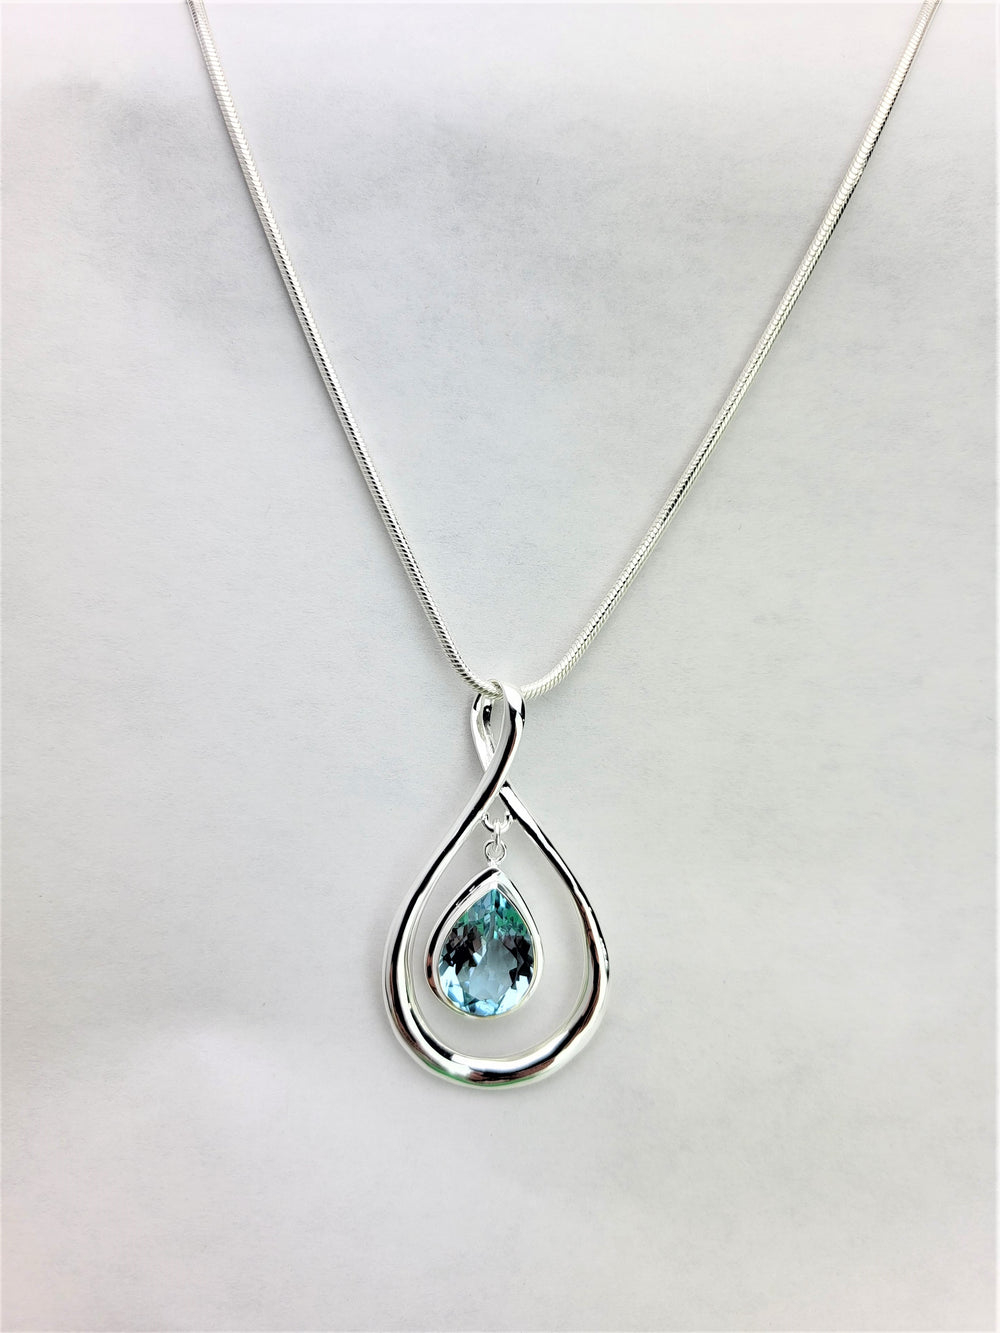 Behold our opulent sterling silver pear-shaped slide, embellished with a captivating 16mm x 12mm faceted light blue topaz. Meticulously crafted with .925 Sterling Silver, it flawlessly complements our 3mm Domed Omega Sterling Silver Necklace. Indulge in the ultimate expression of luxury and sophistication.